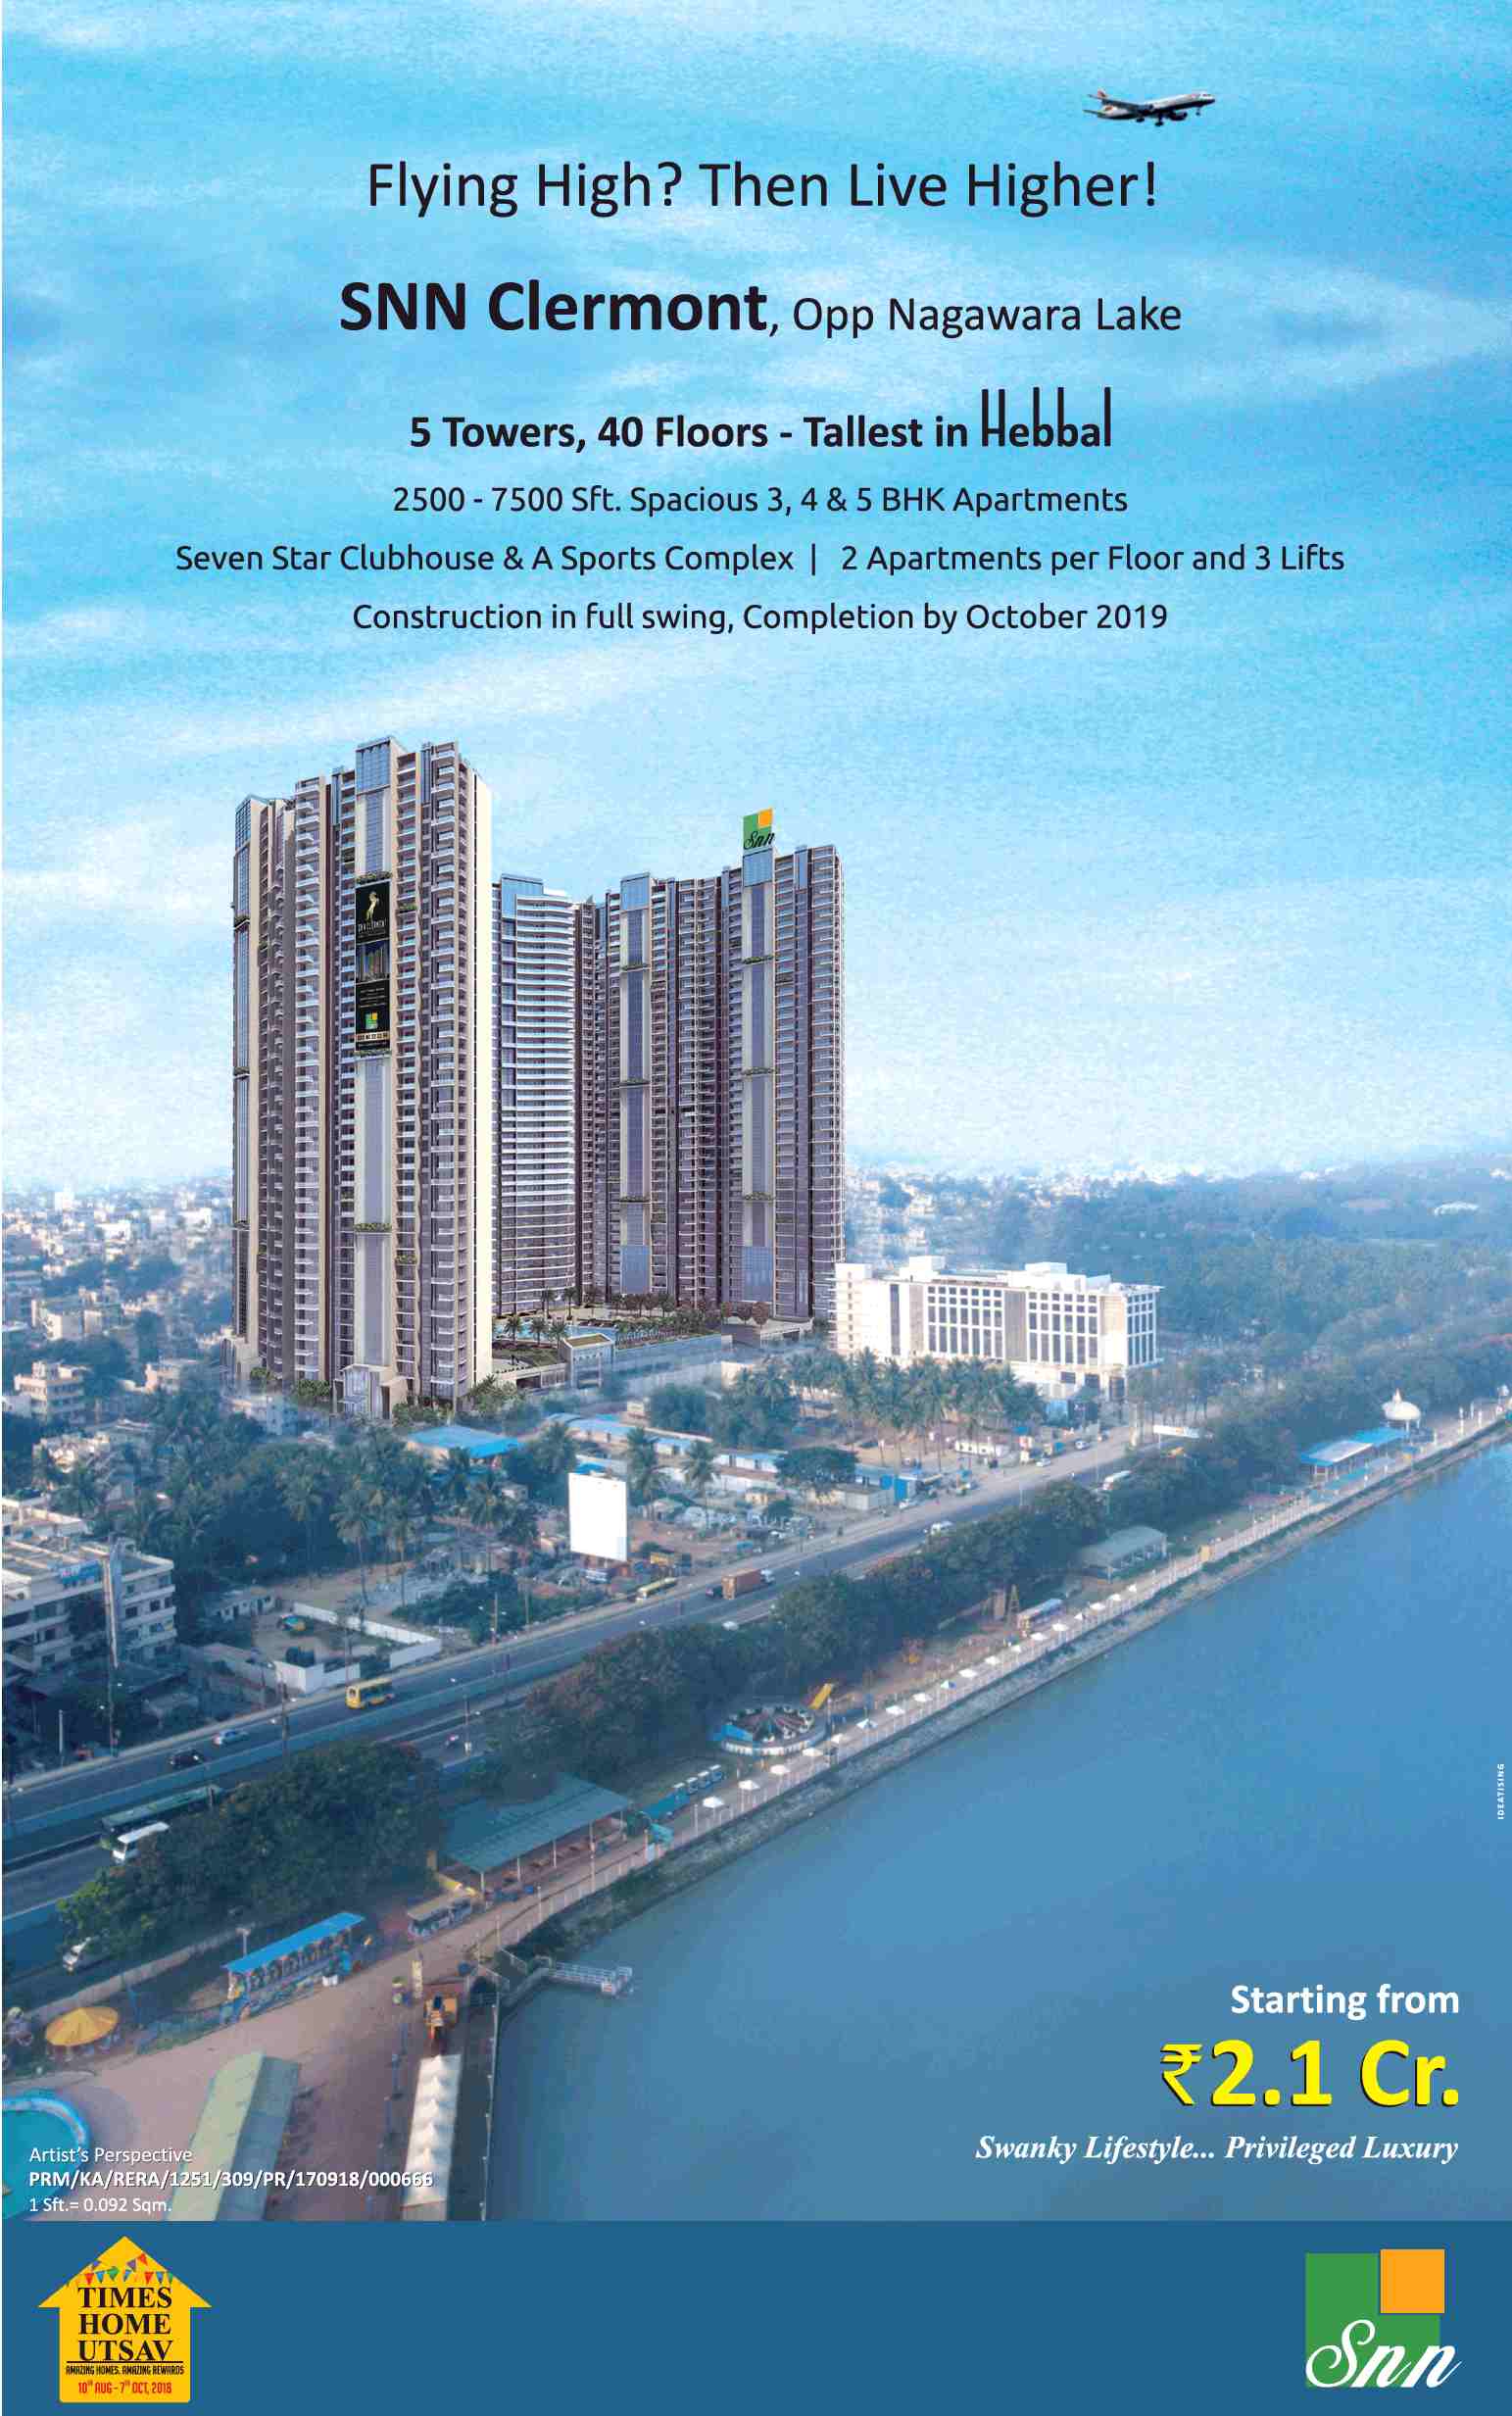 Book spacious apartments with seven star clubhouse @ Rs 2.1 cr at SNN Clermont in Bangalore Update